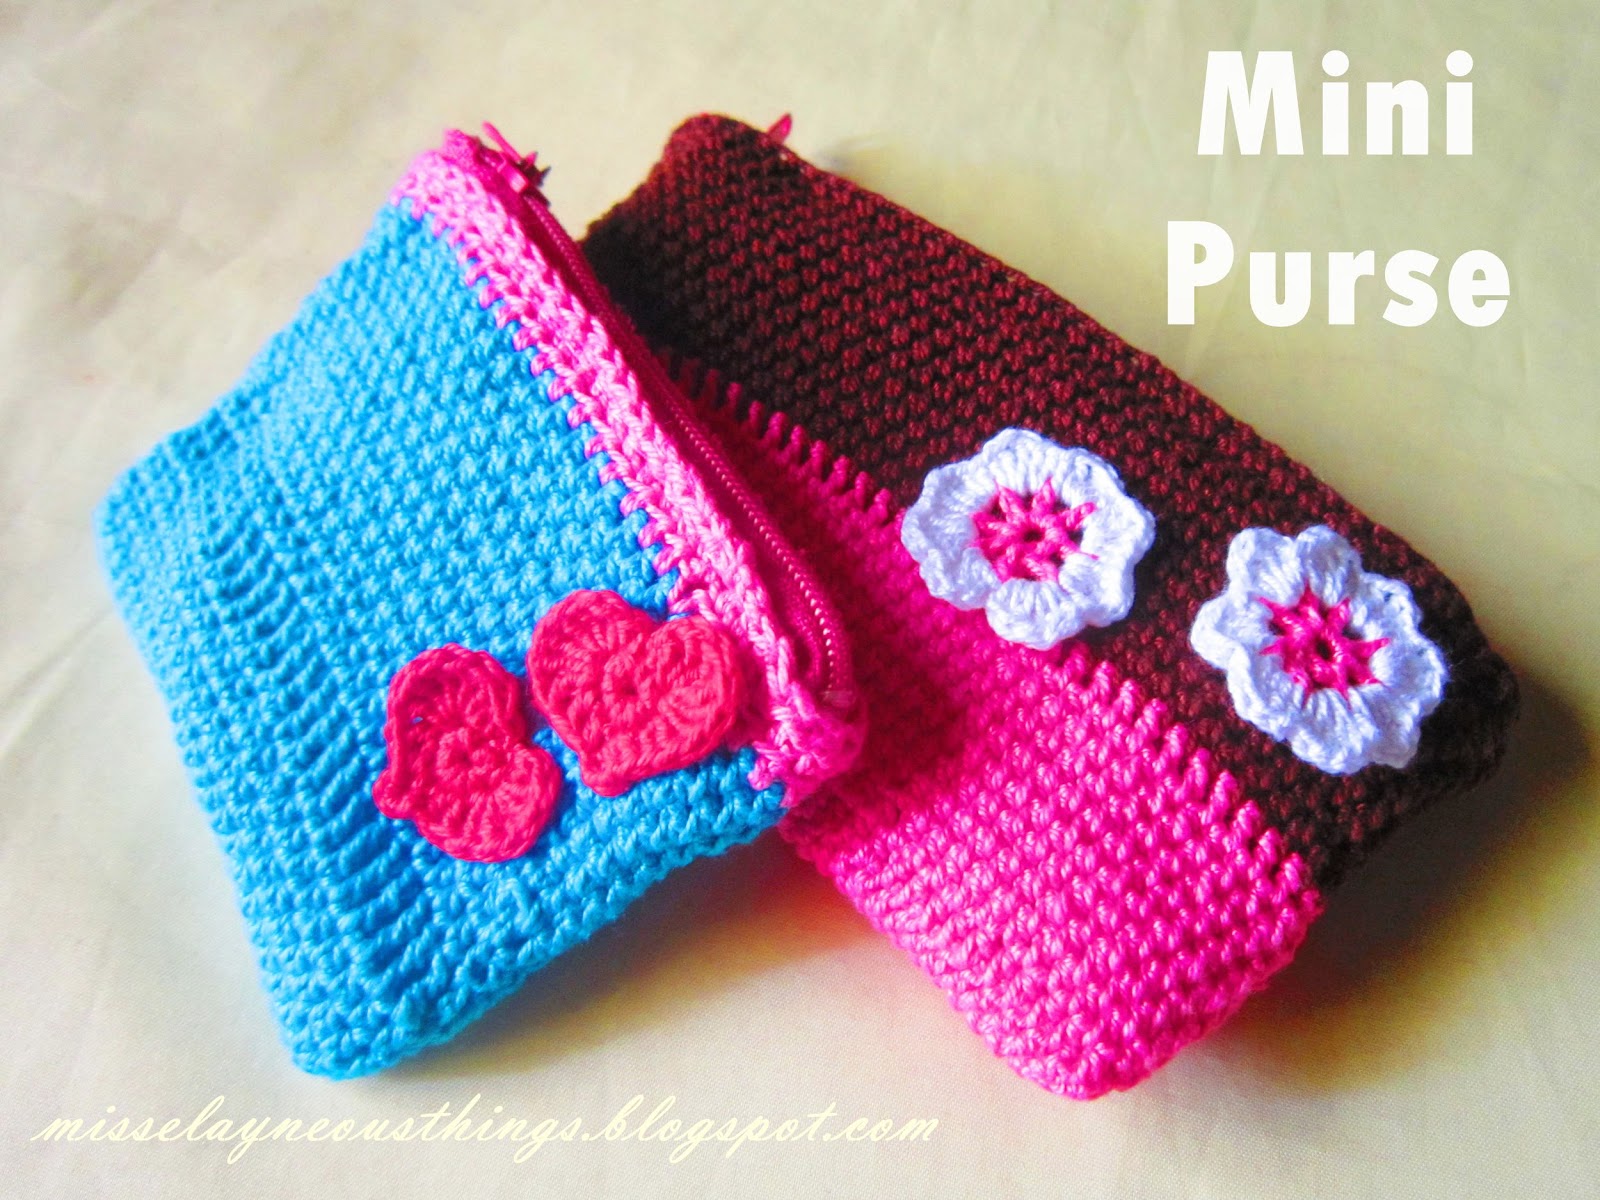 Crocheted Mini Purse - A Blog about Misselayneous Things